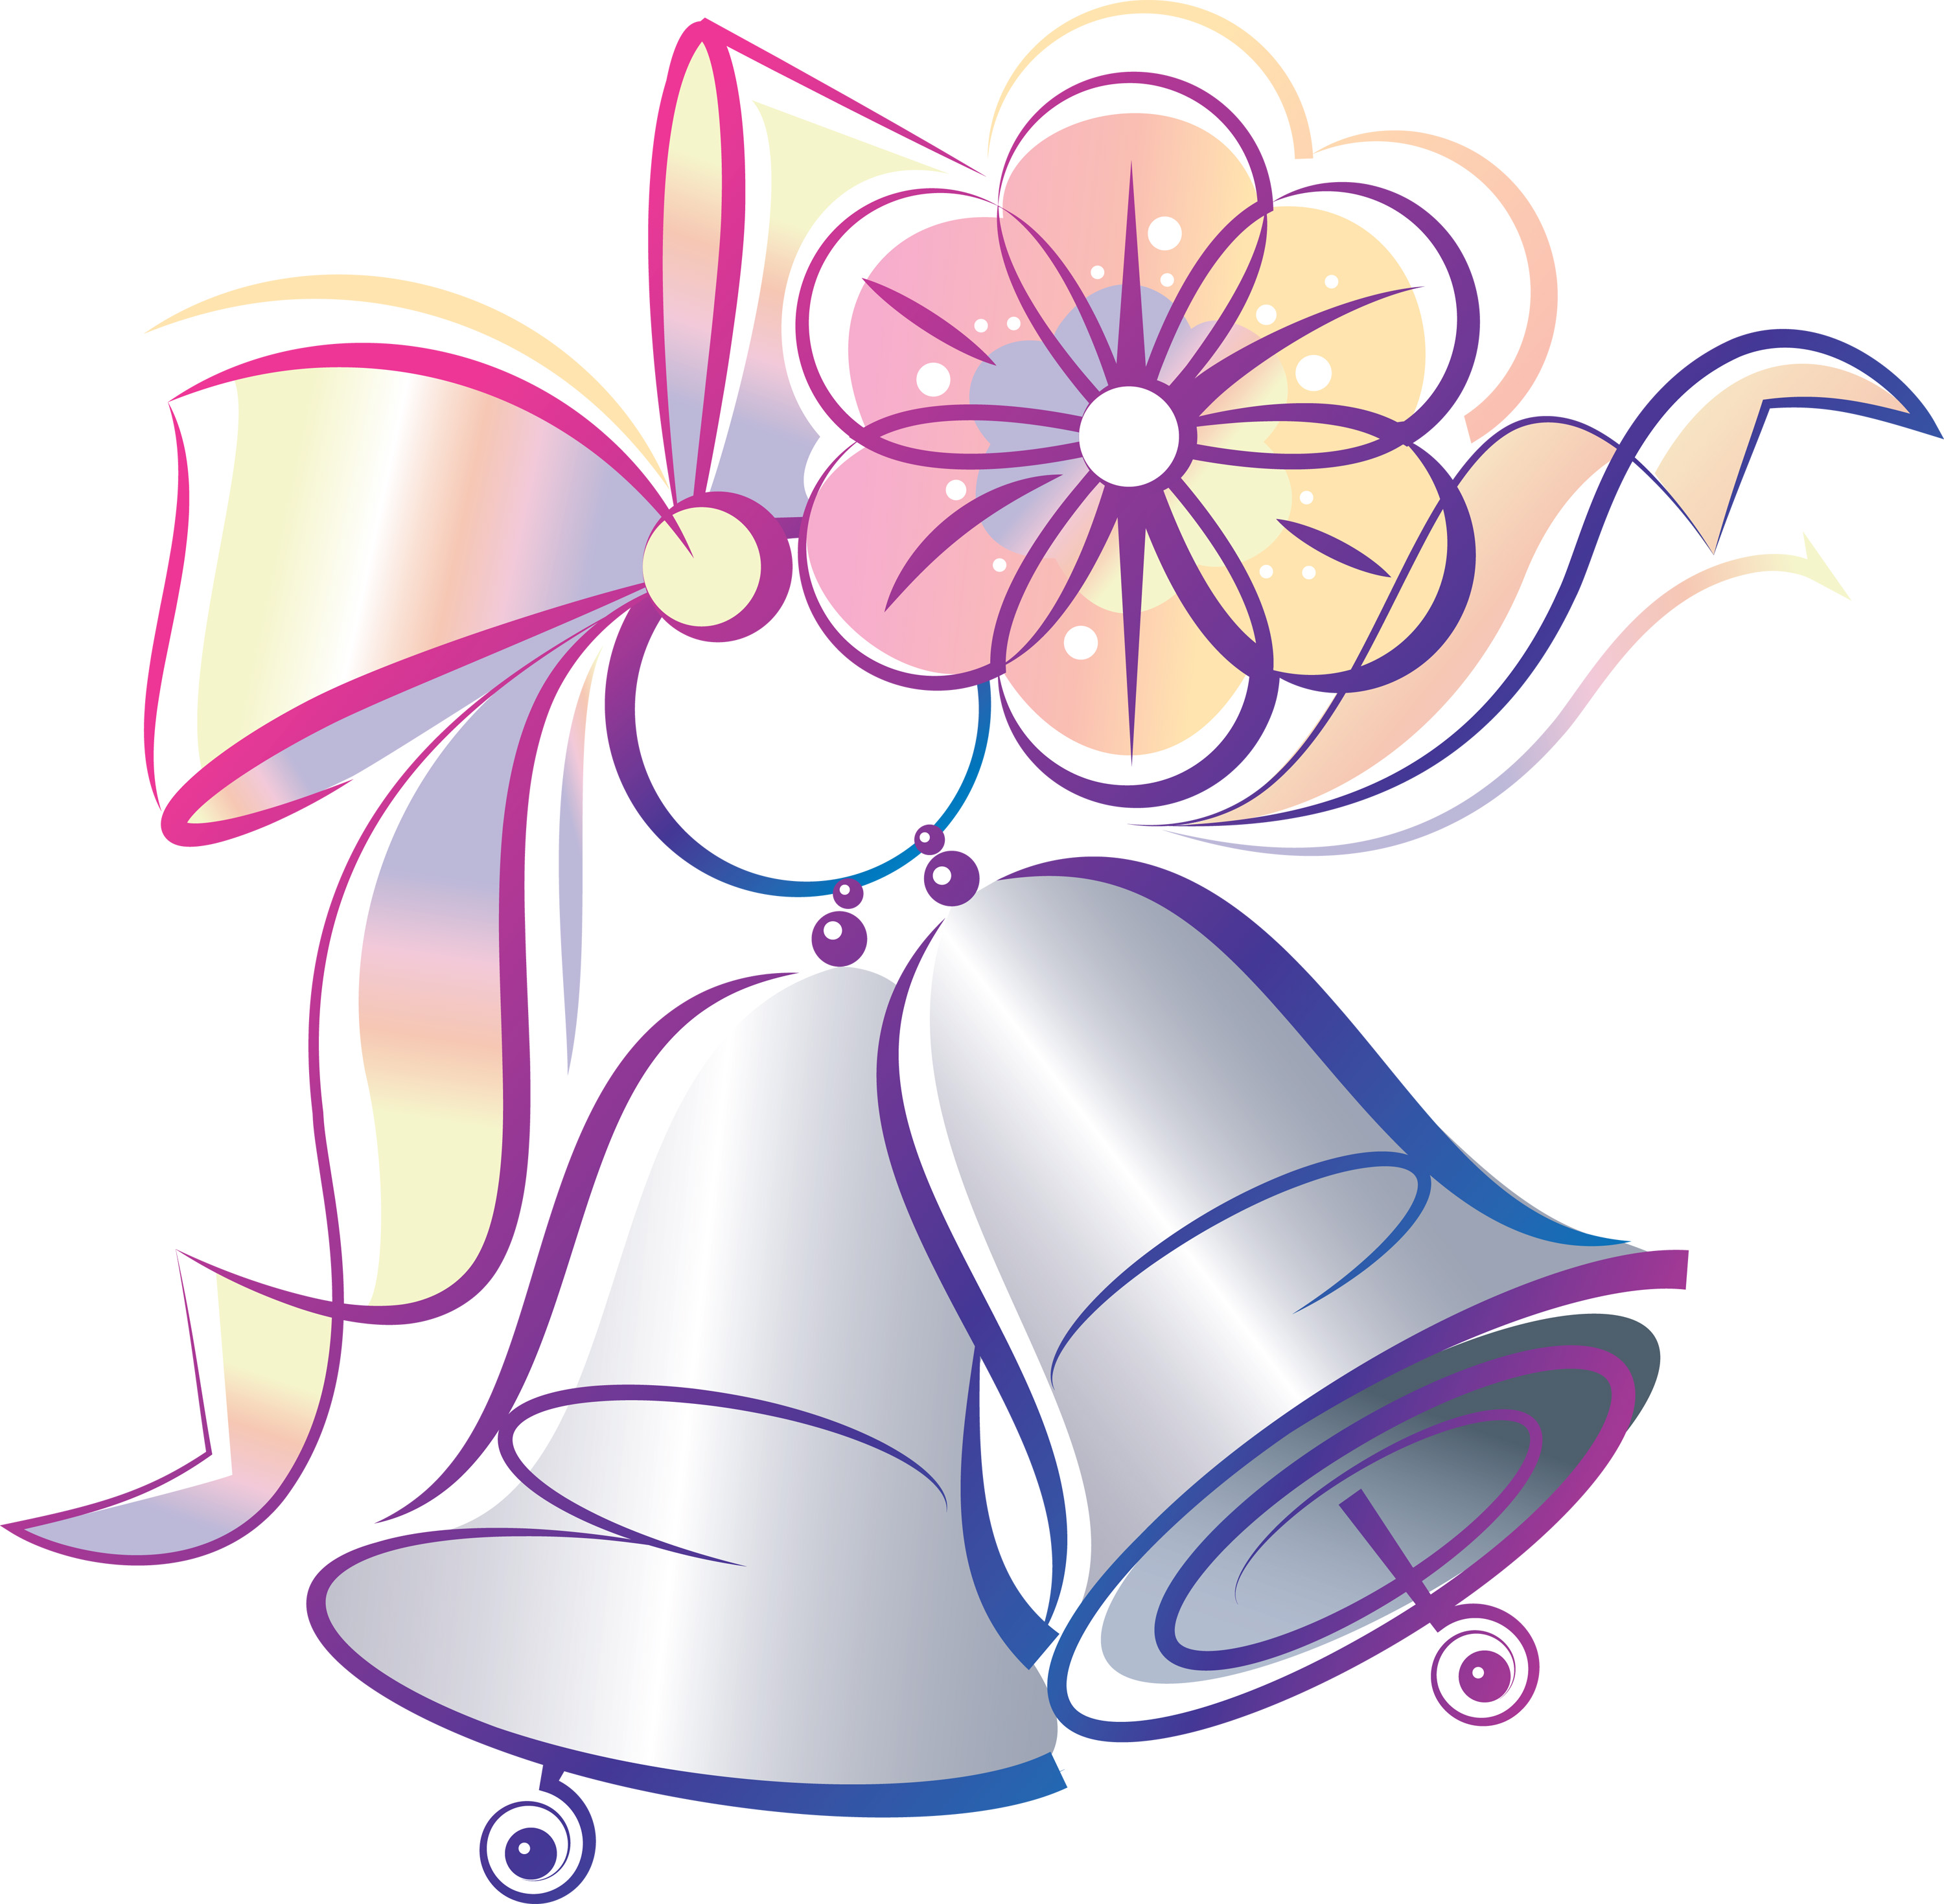 free clipart wedding bell